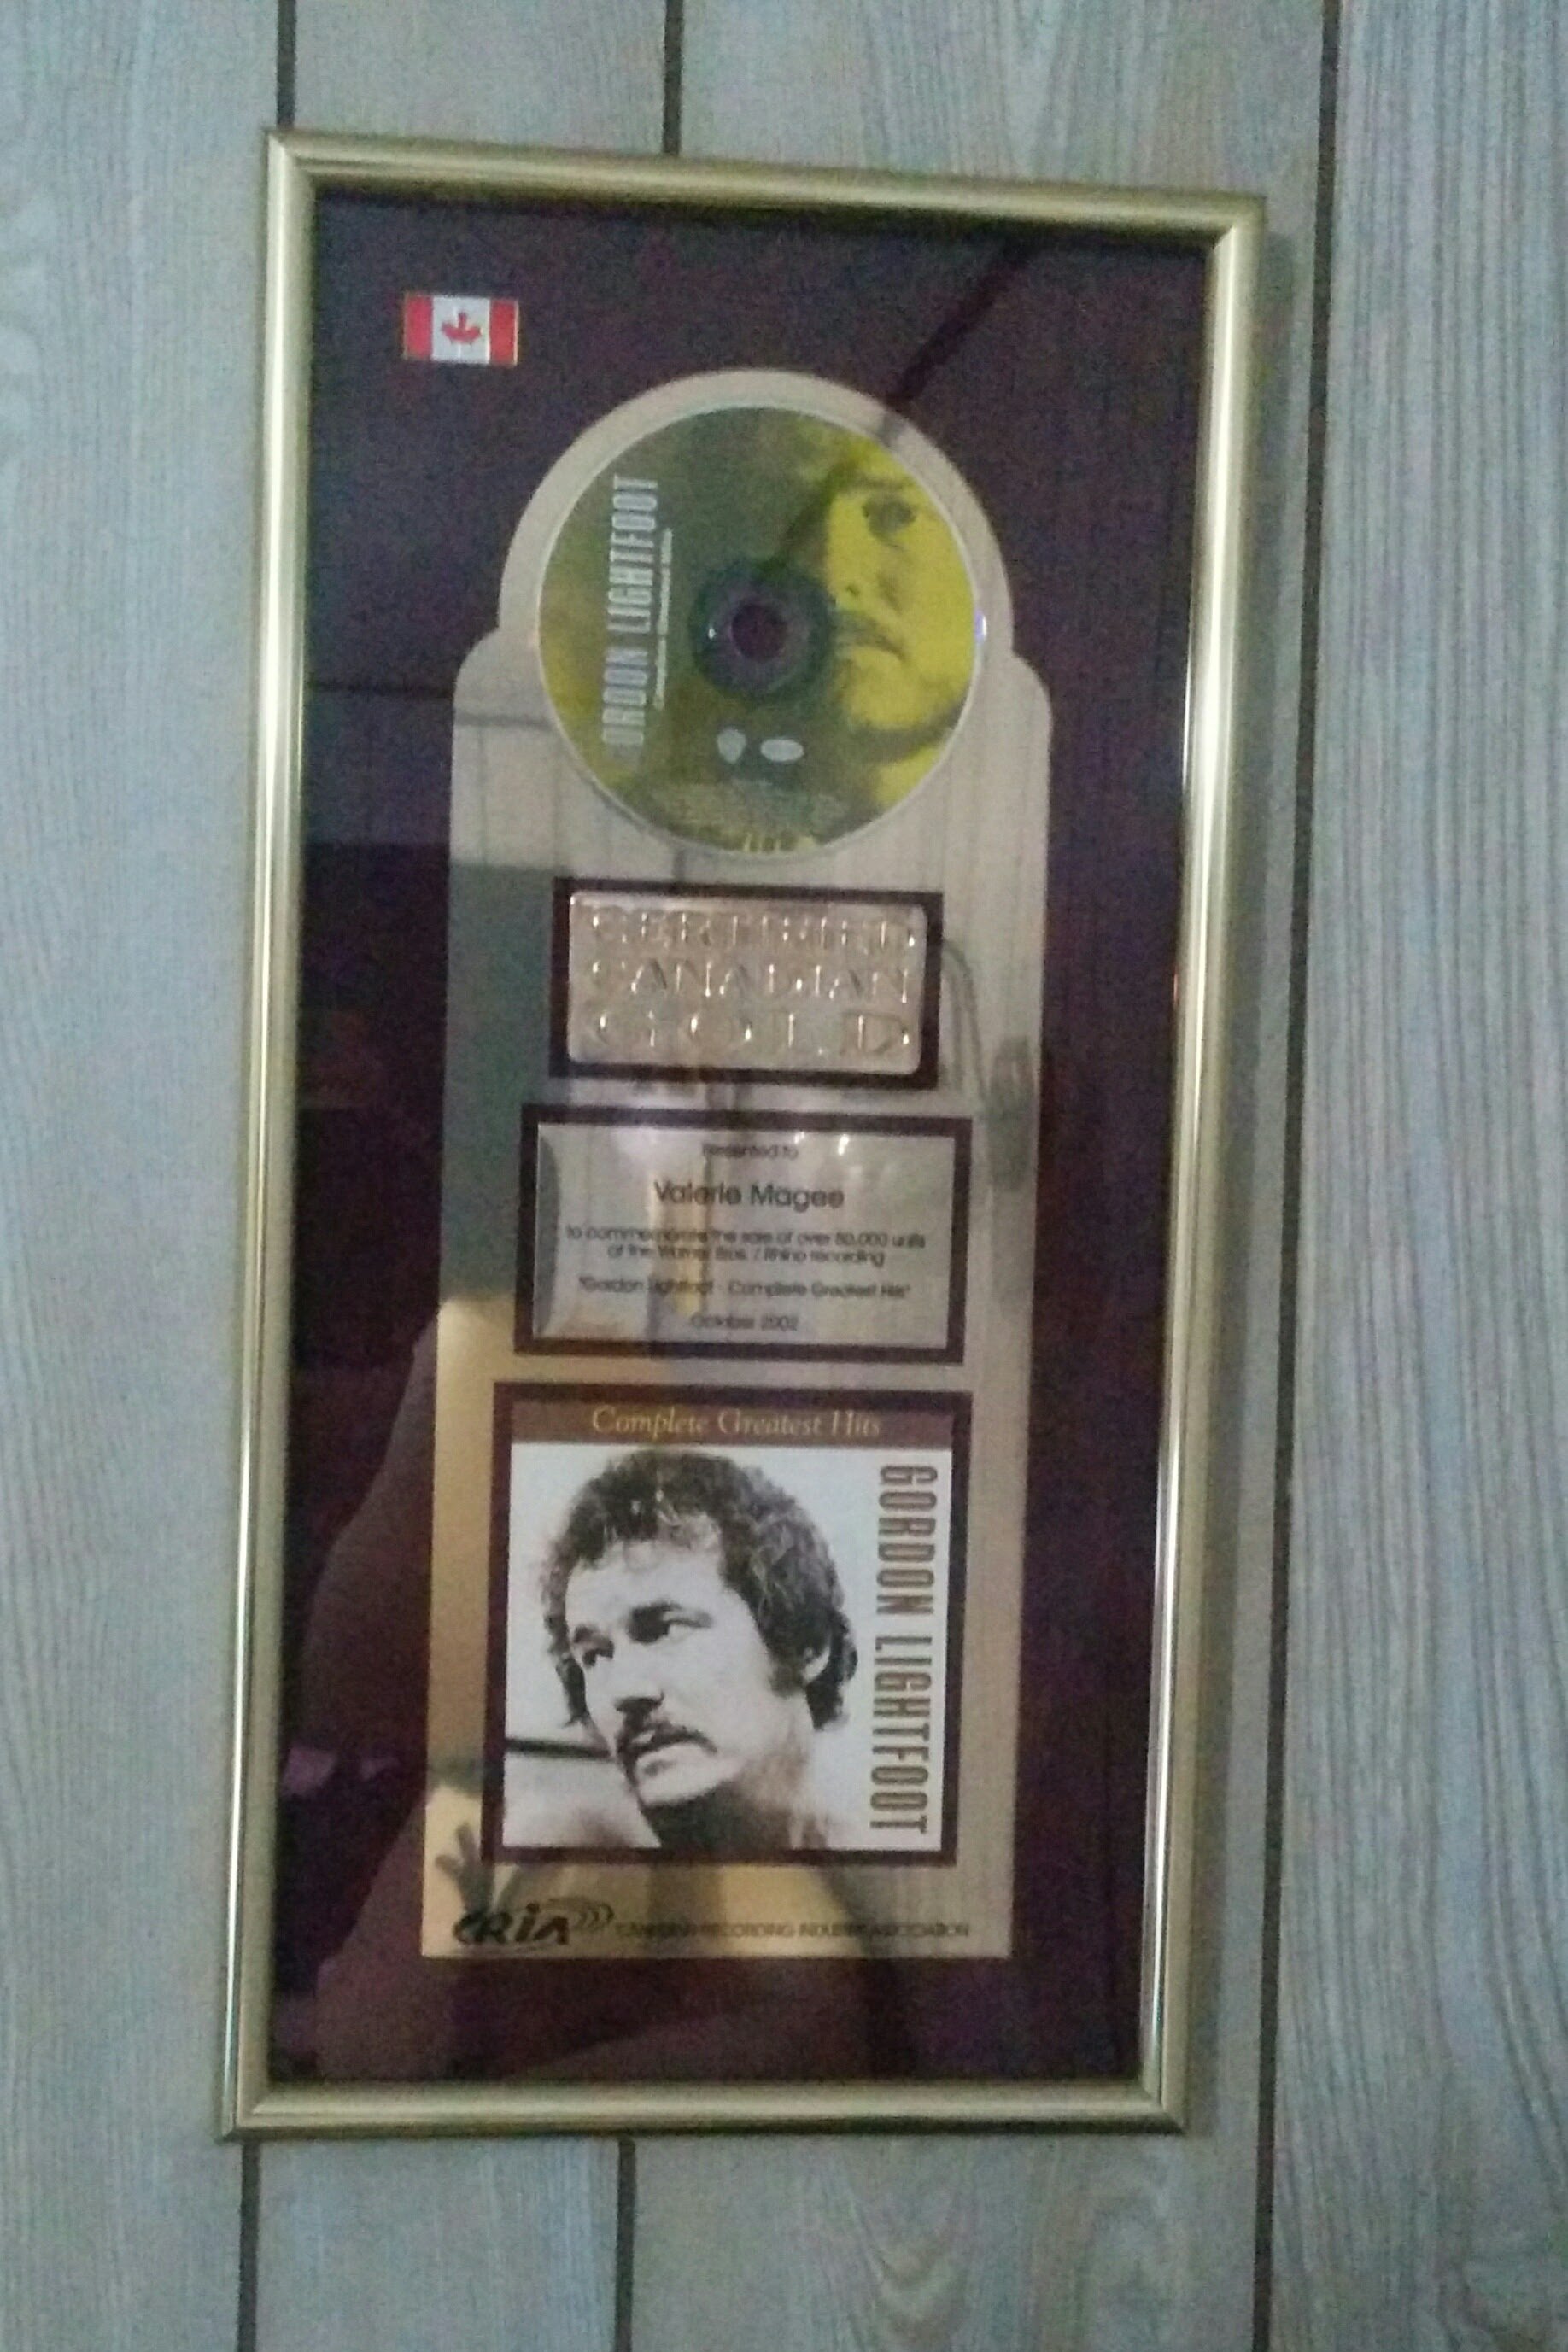 My Gold Record